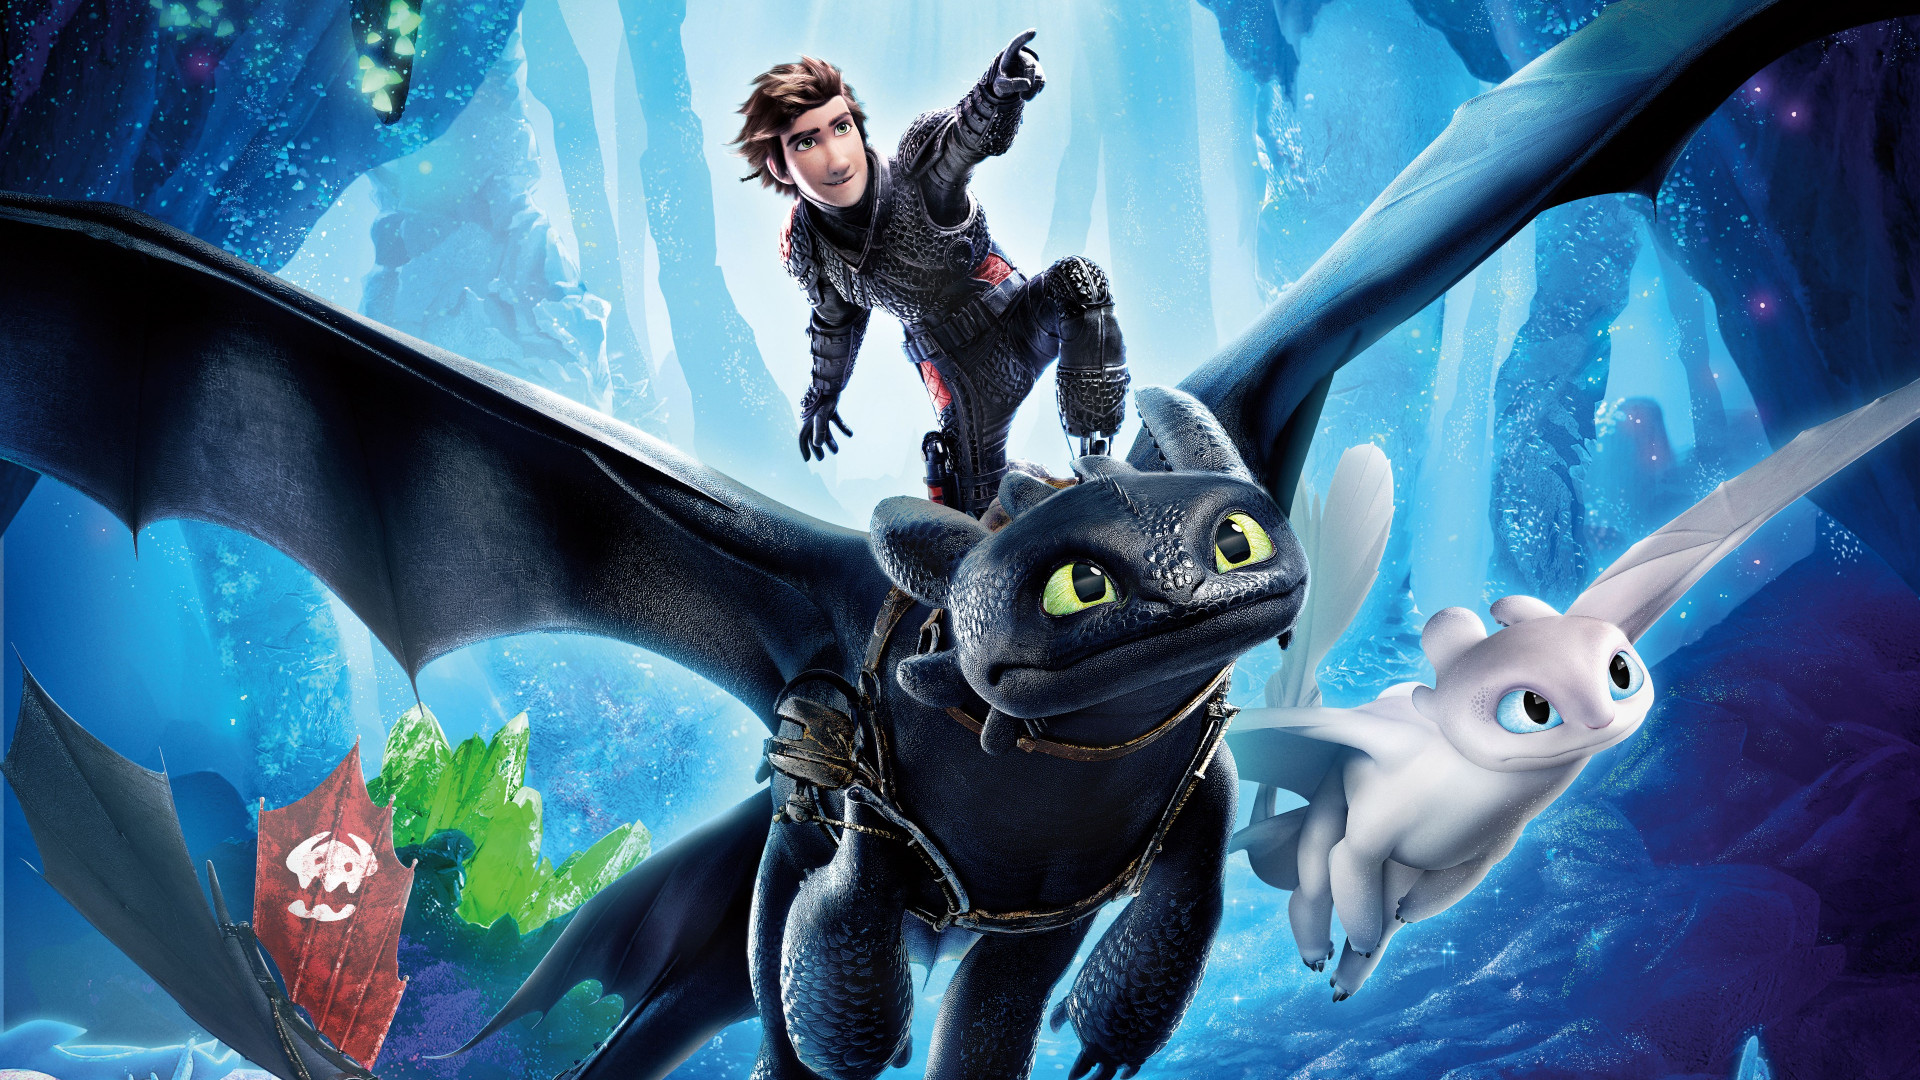 How to Train Your Dragon 2019 wallpaper 1920x1080